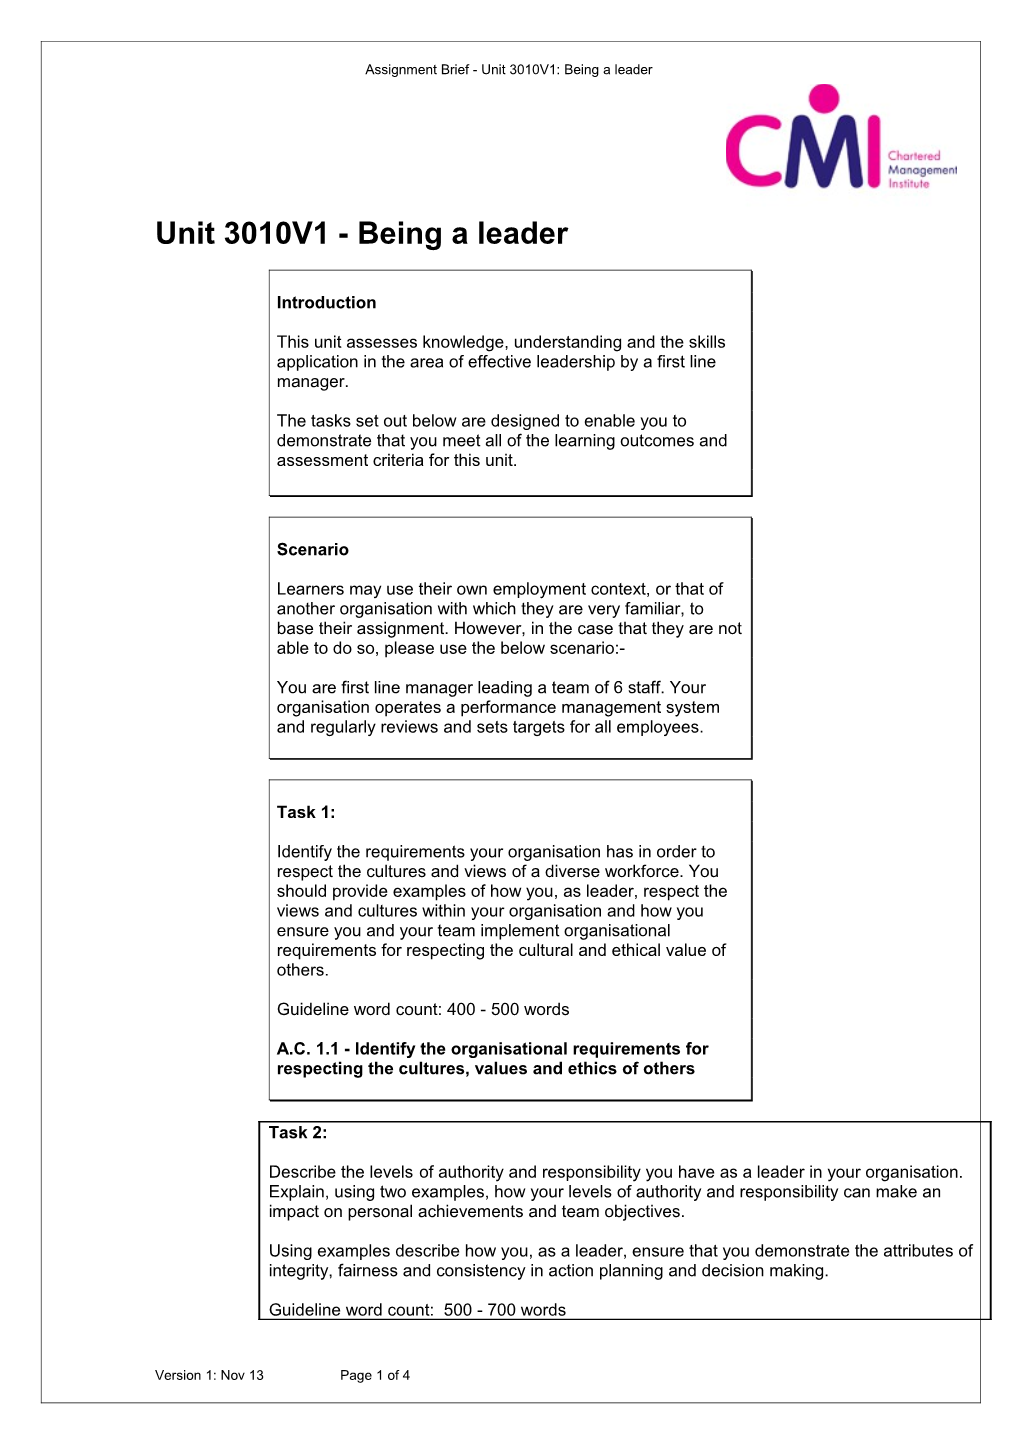 Assignment Brief - Unit 3010V1: Being a Leader